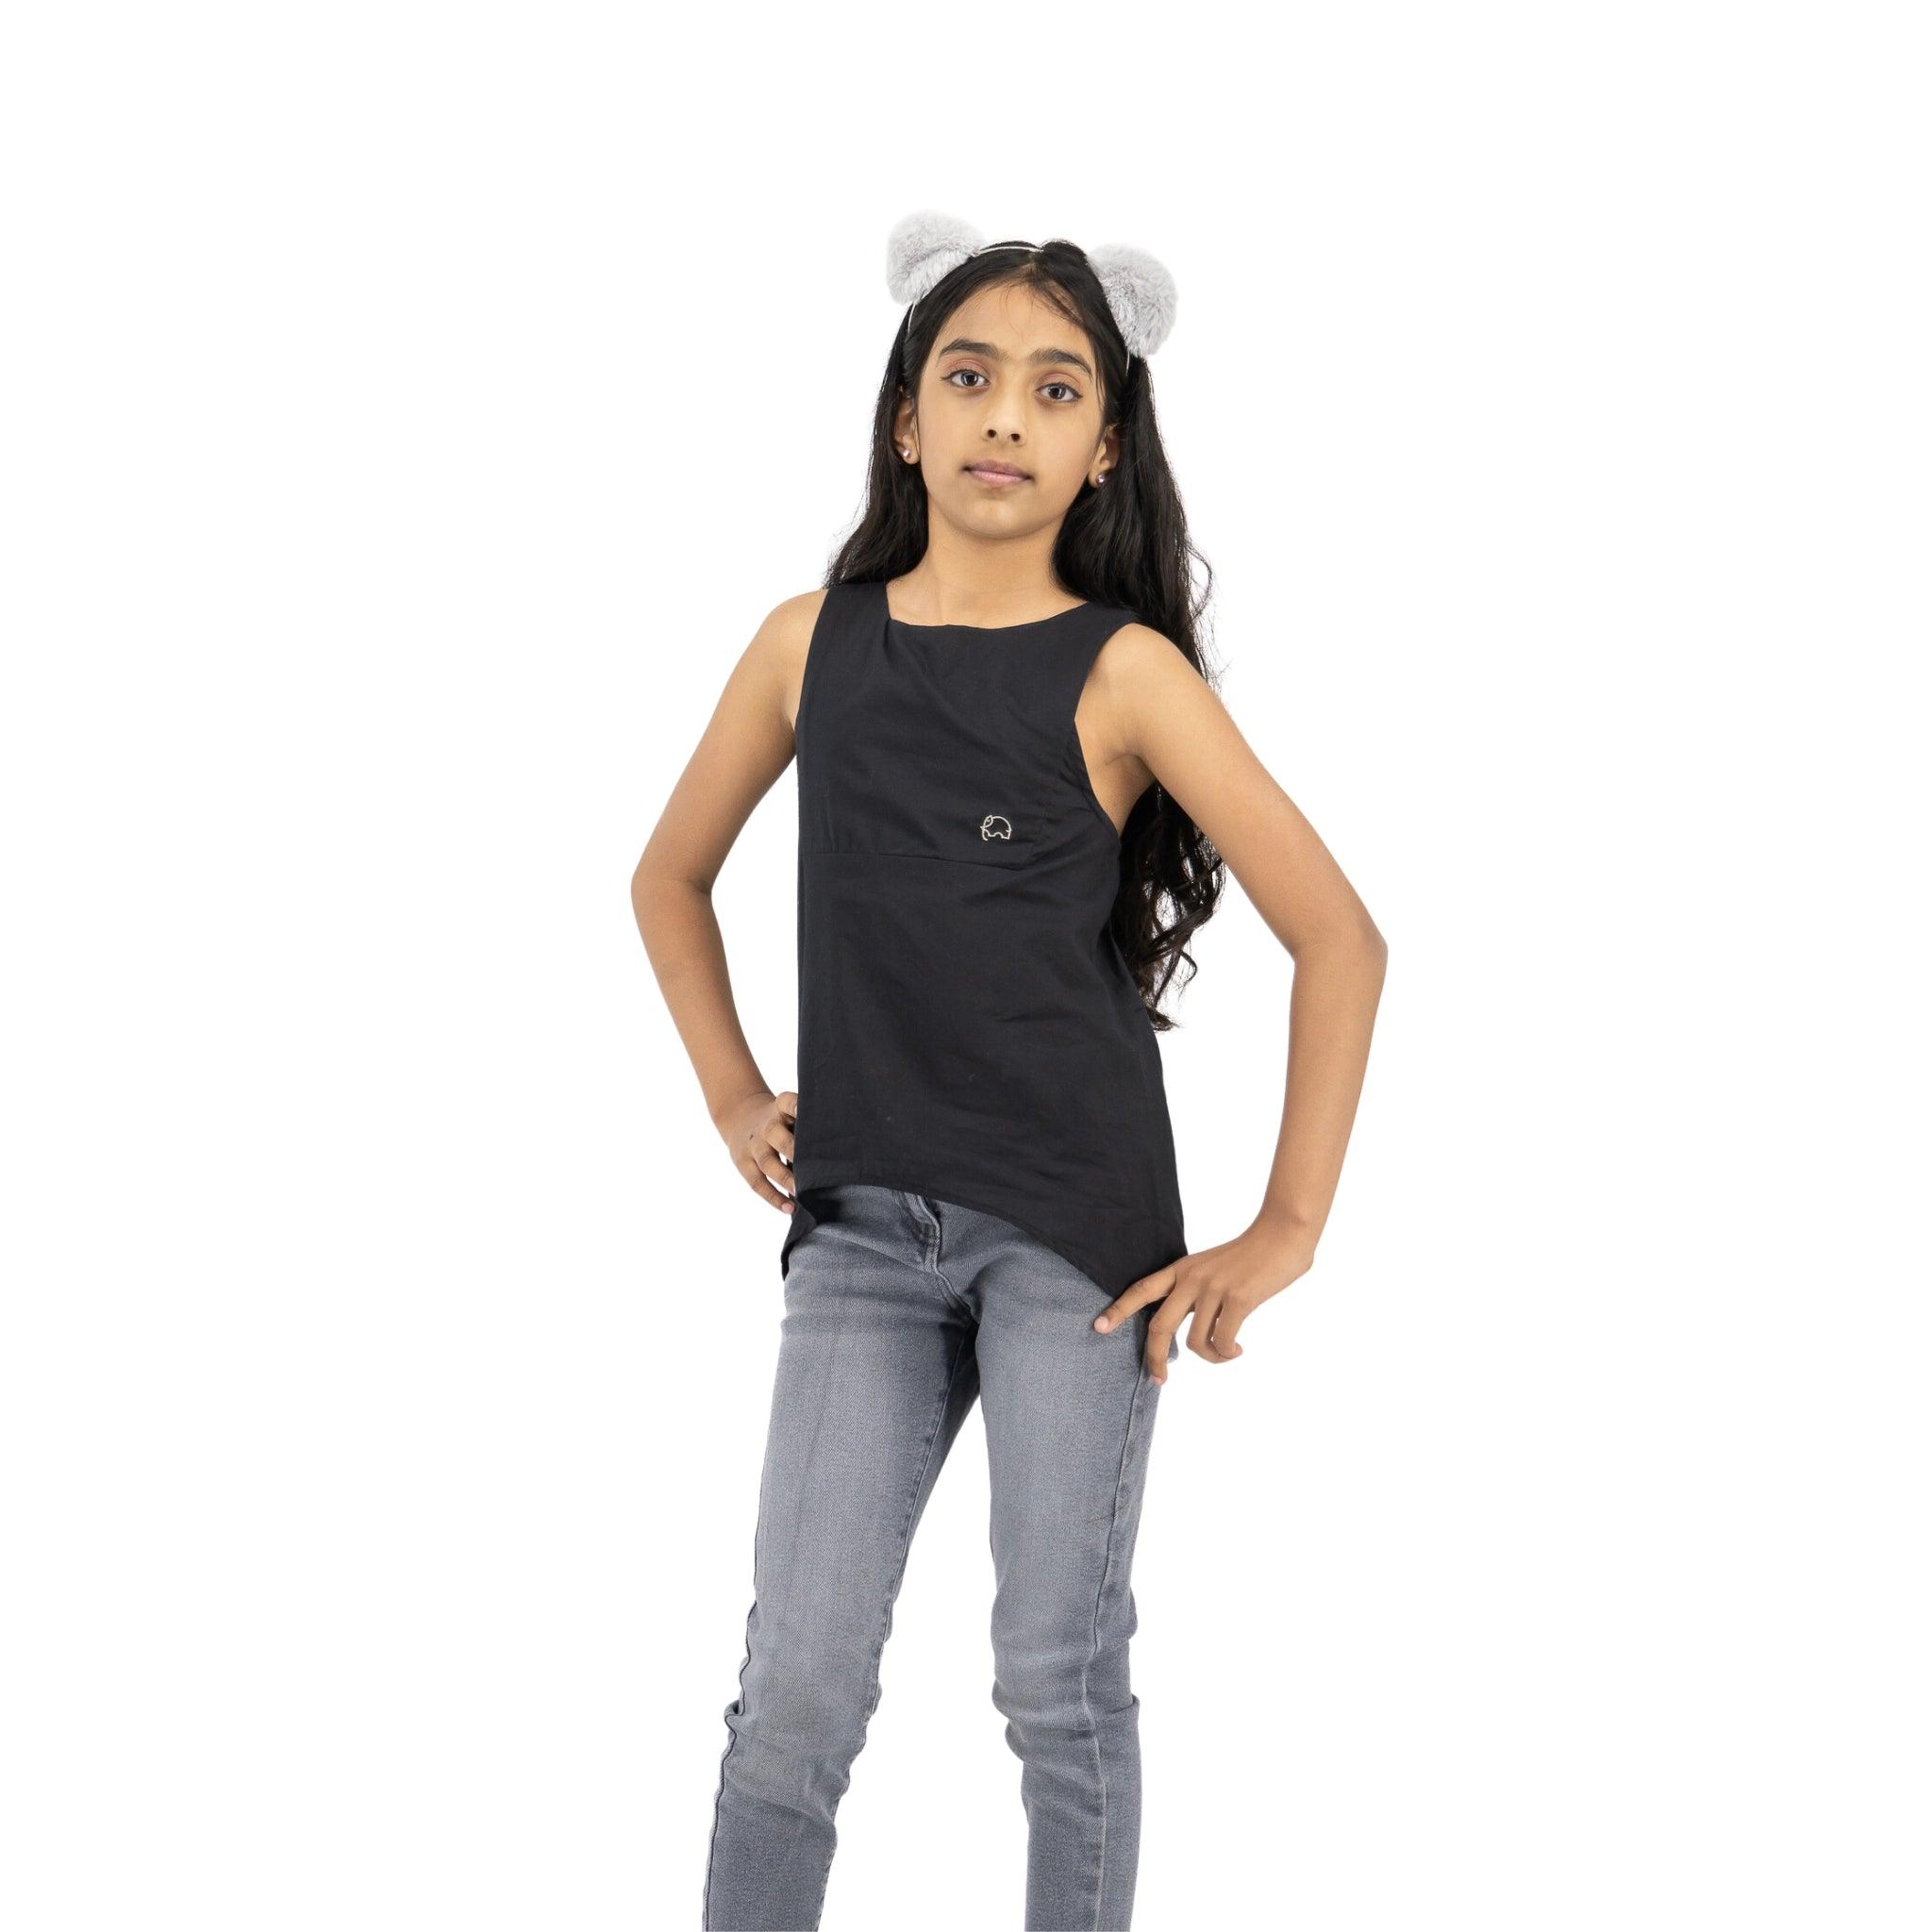 Young girl wearing a Karee Black Beauty Cotton Bib Neck Top for kids and blue jeans, hands on hips, looking to the side, isolated on a white background.